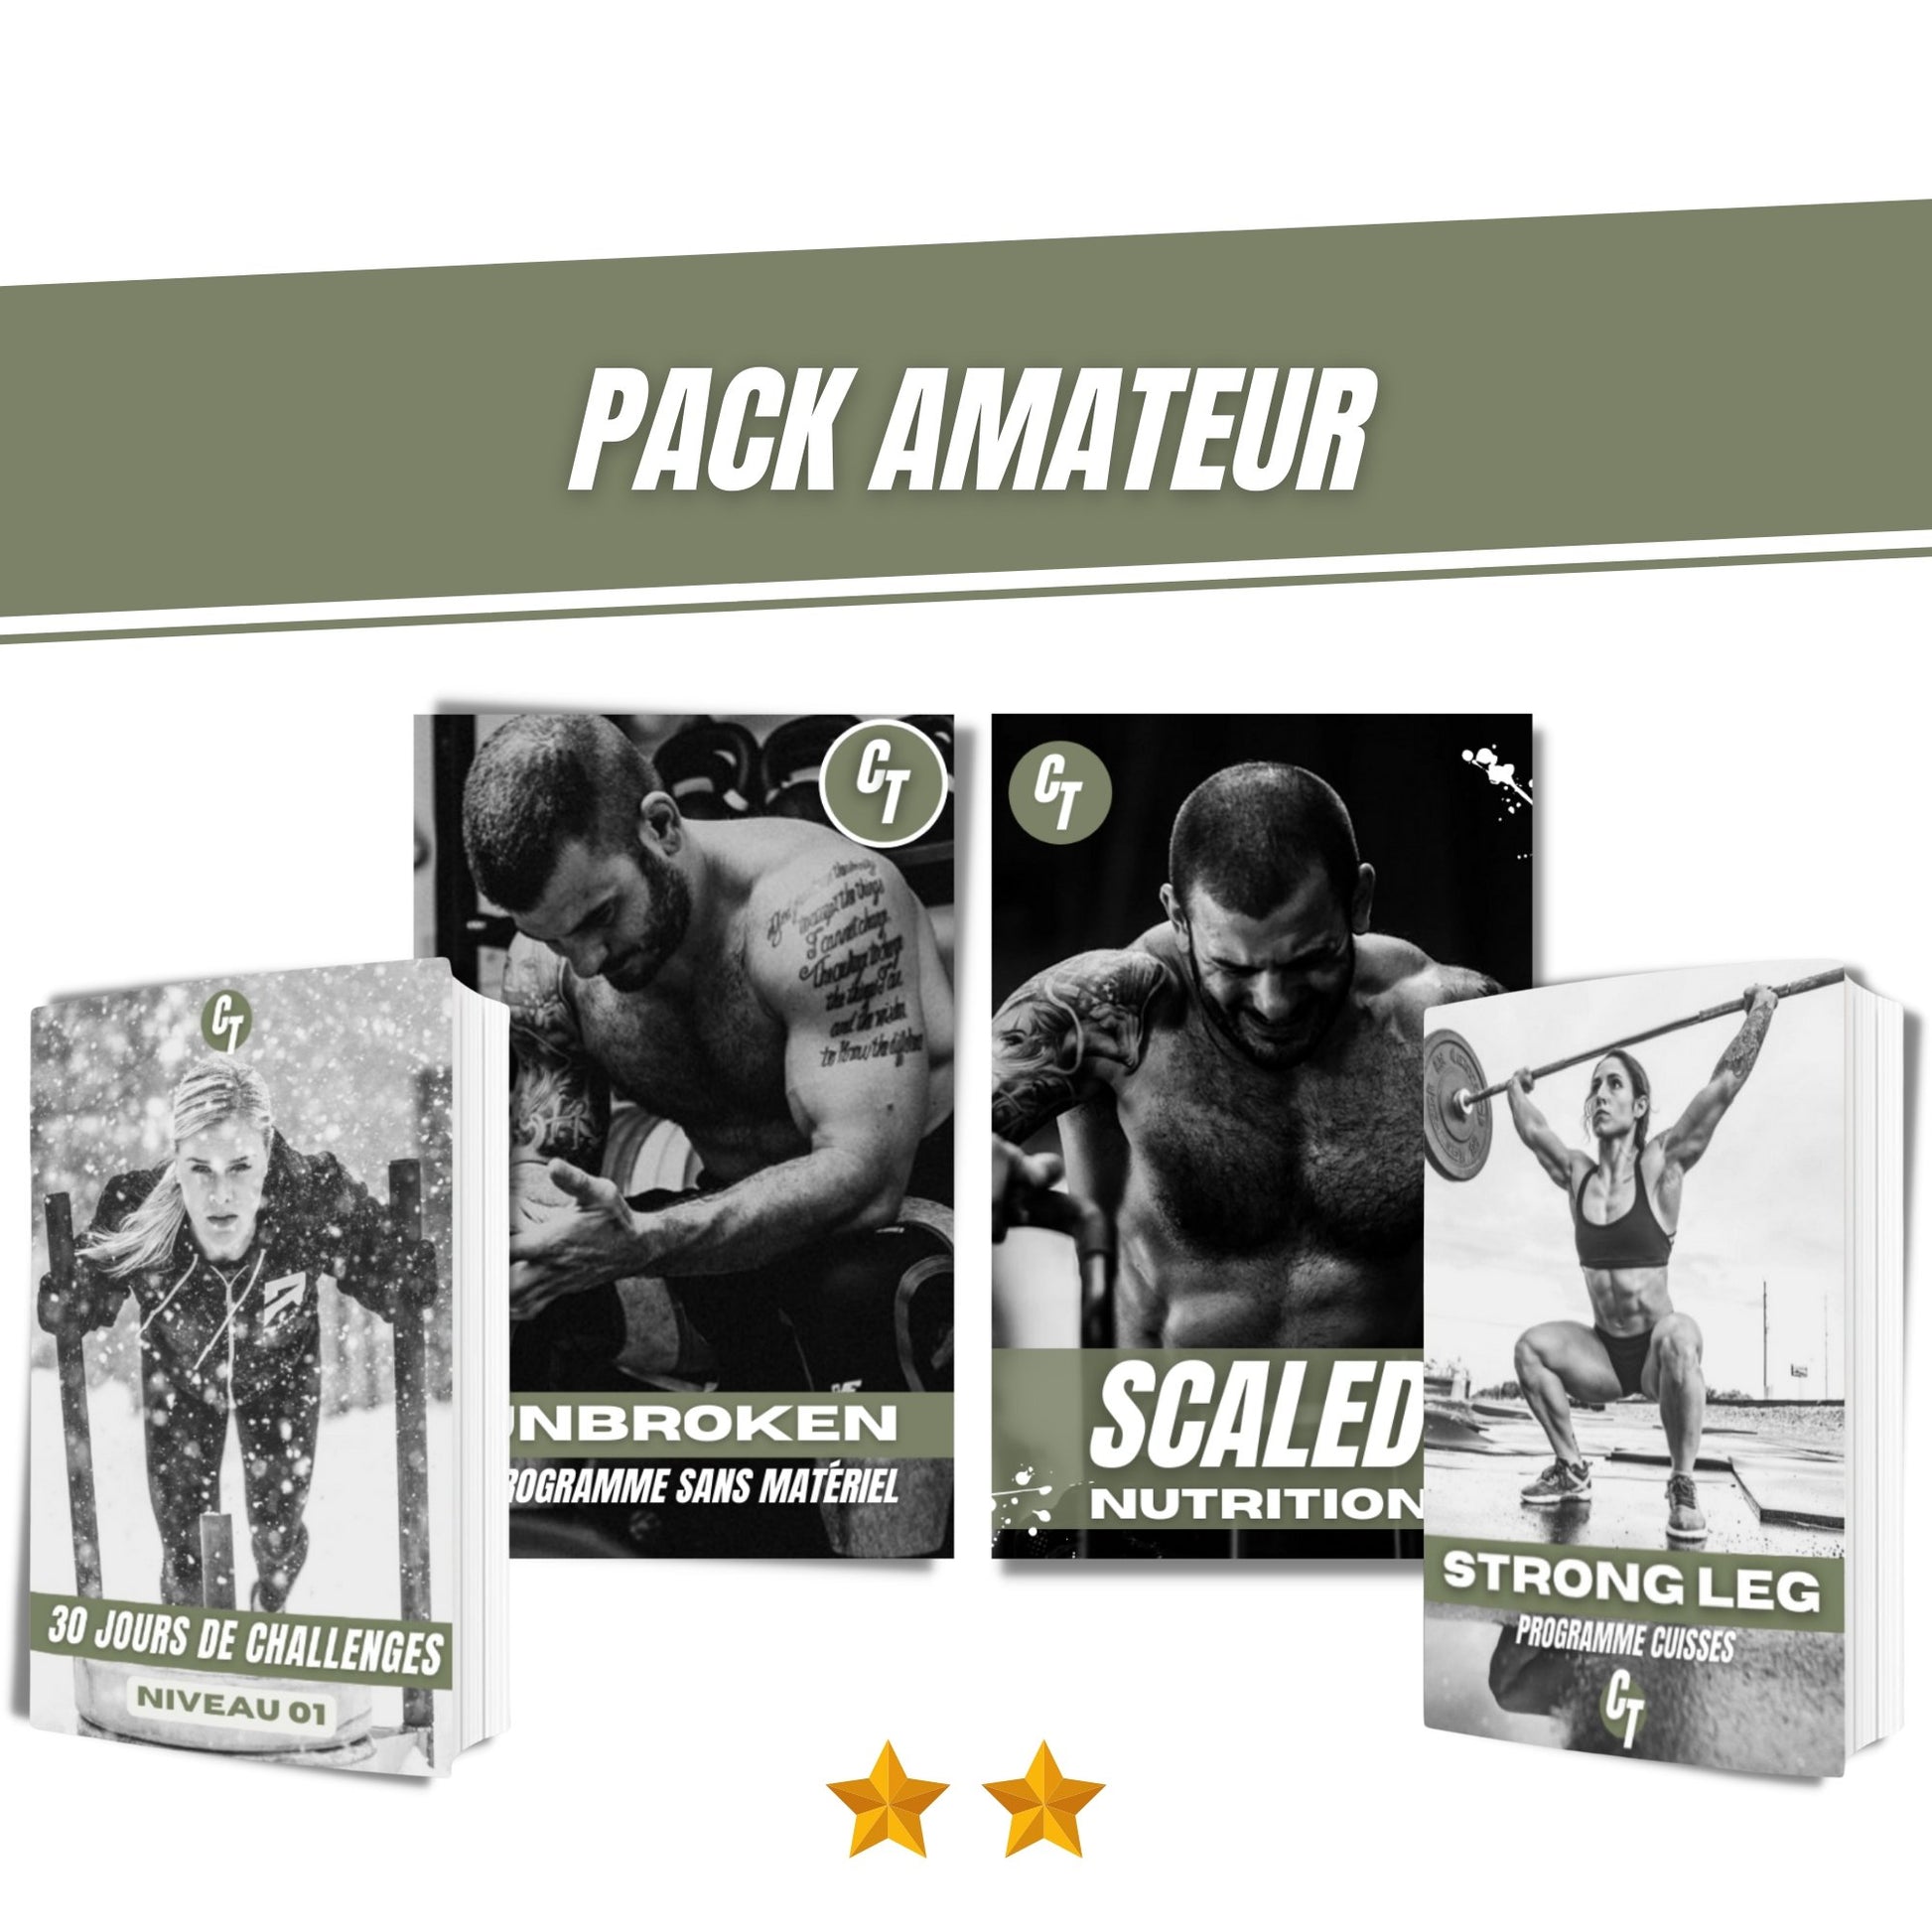 PACK AMATEUR - Charlie Tango Fitness